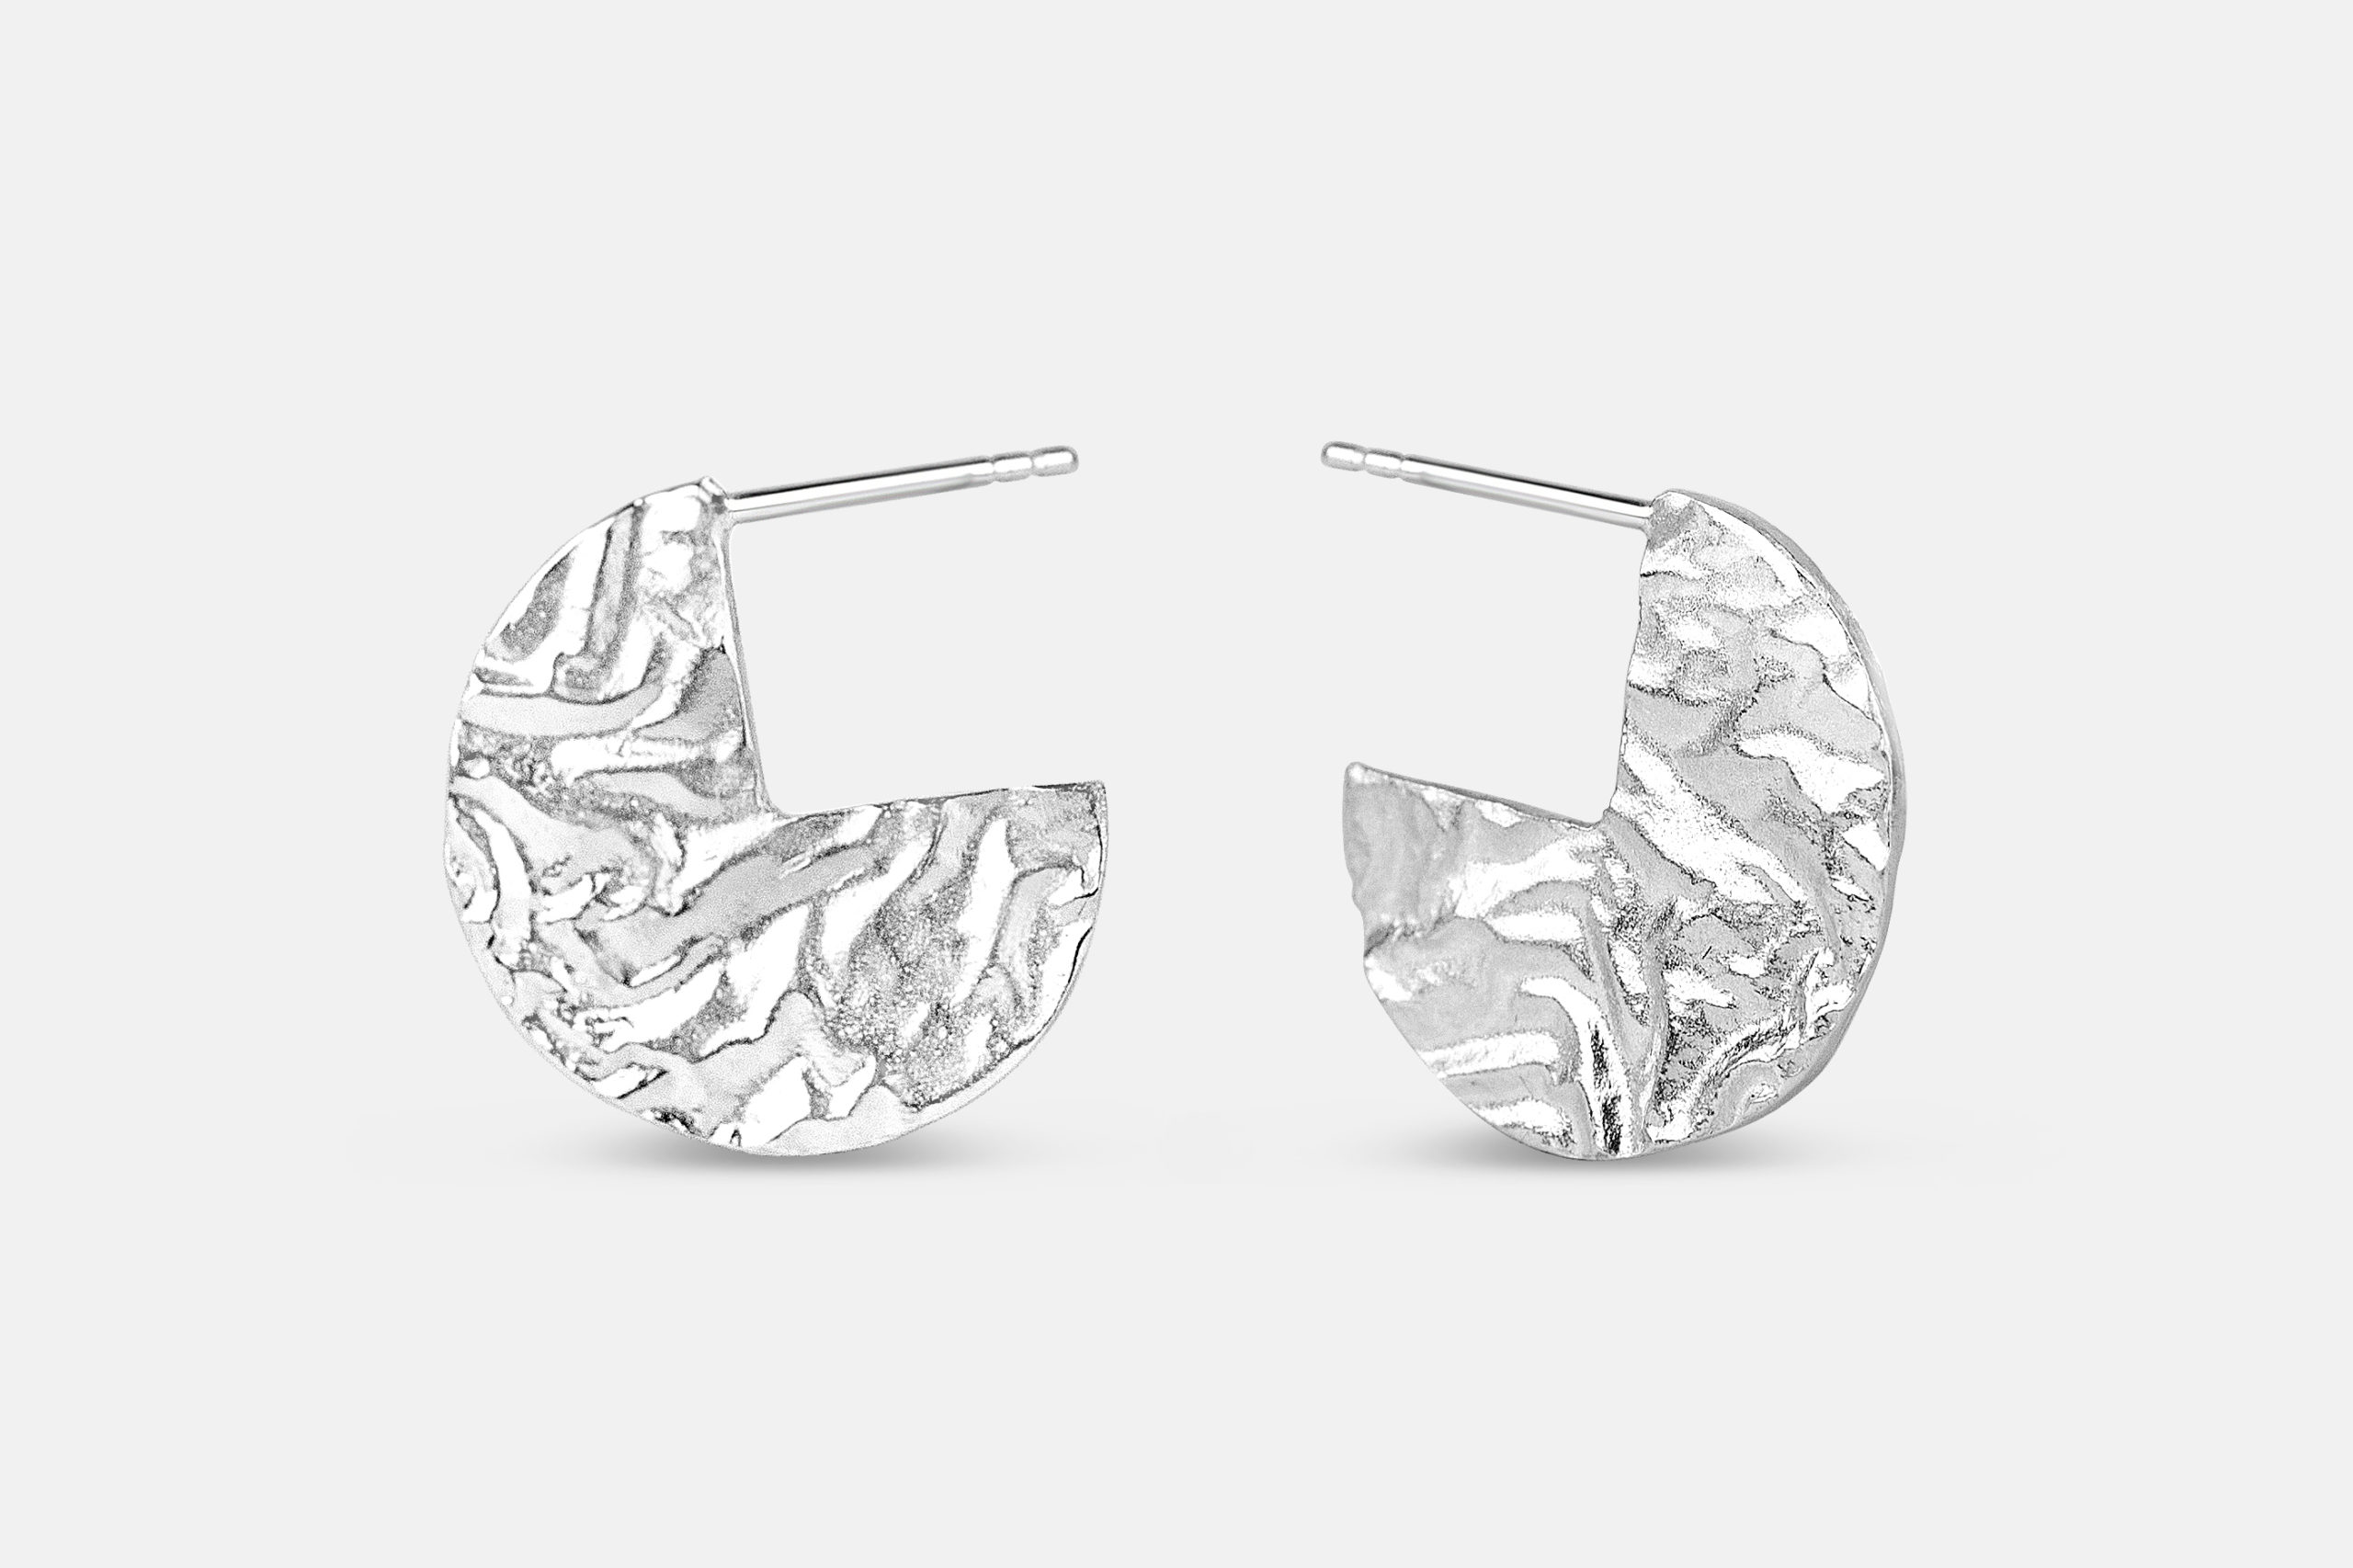 Reticulated silver earring cuffs